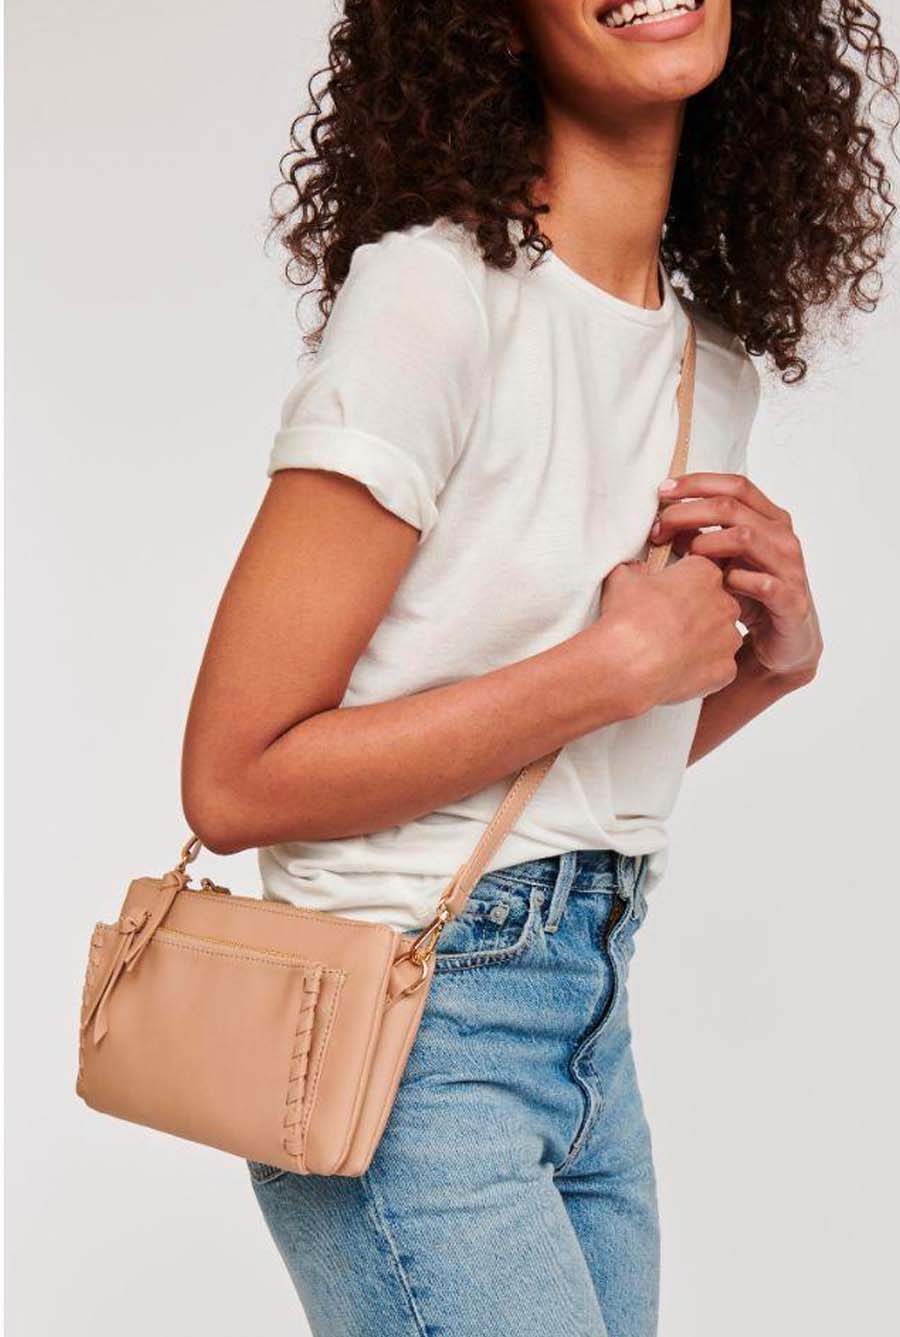 'Kenzie' Crossbody Purse - Purses and Bags - The Green Brick Boutique